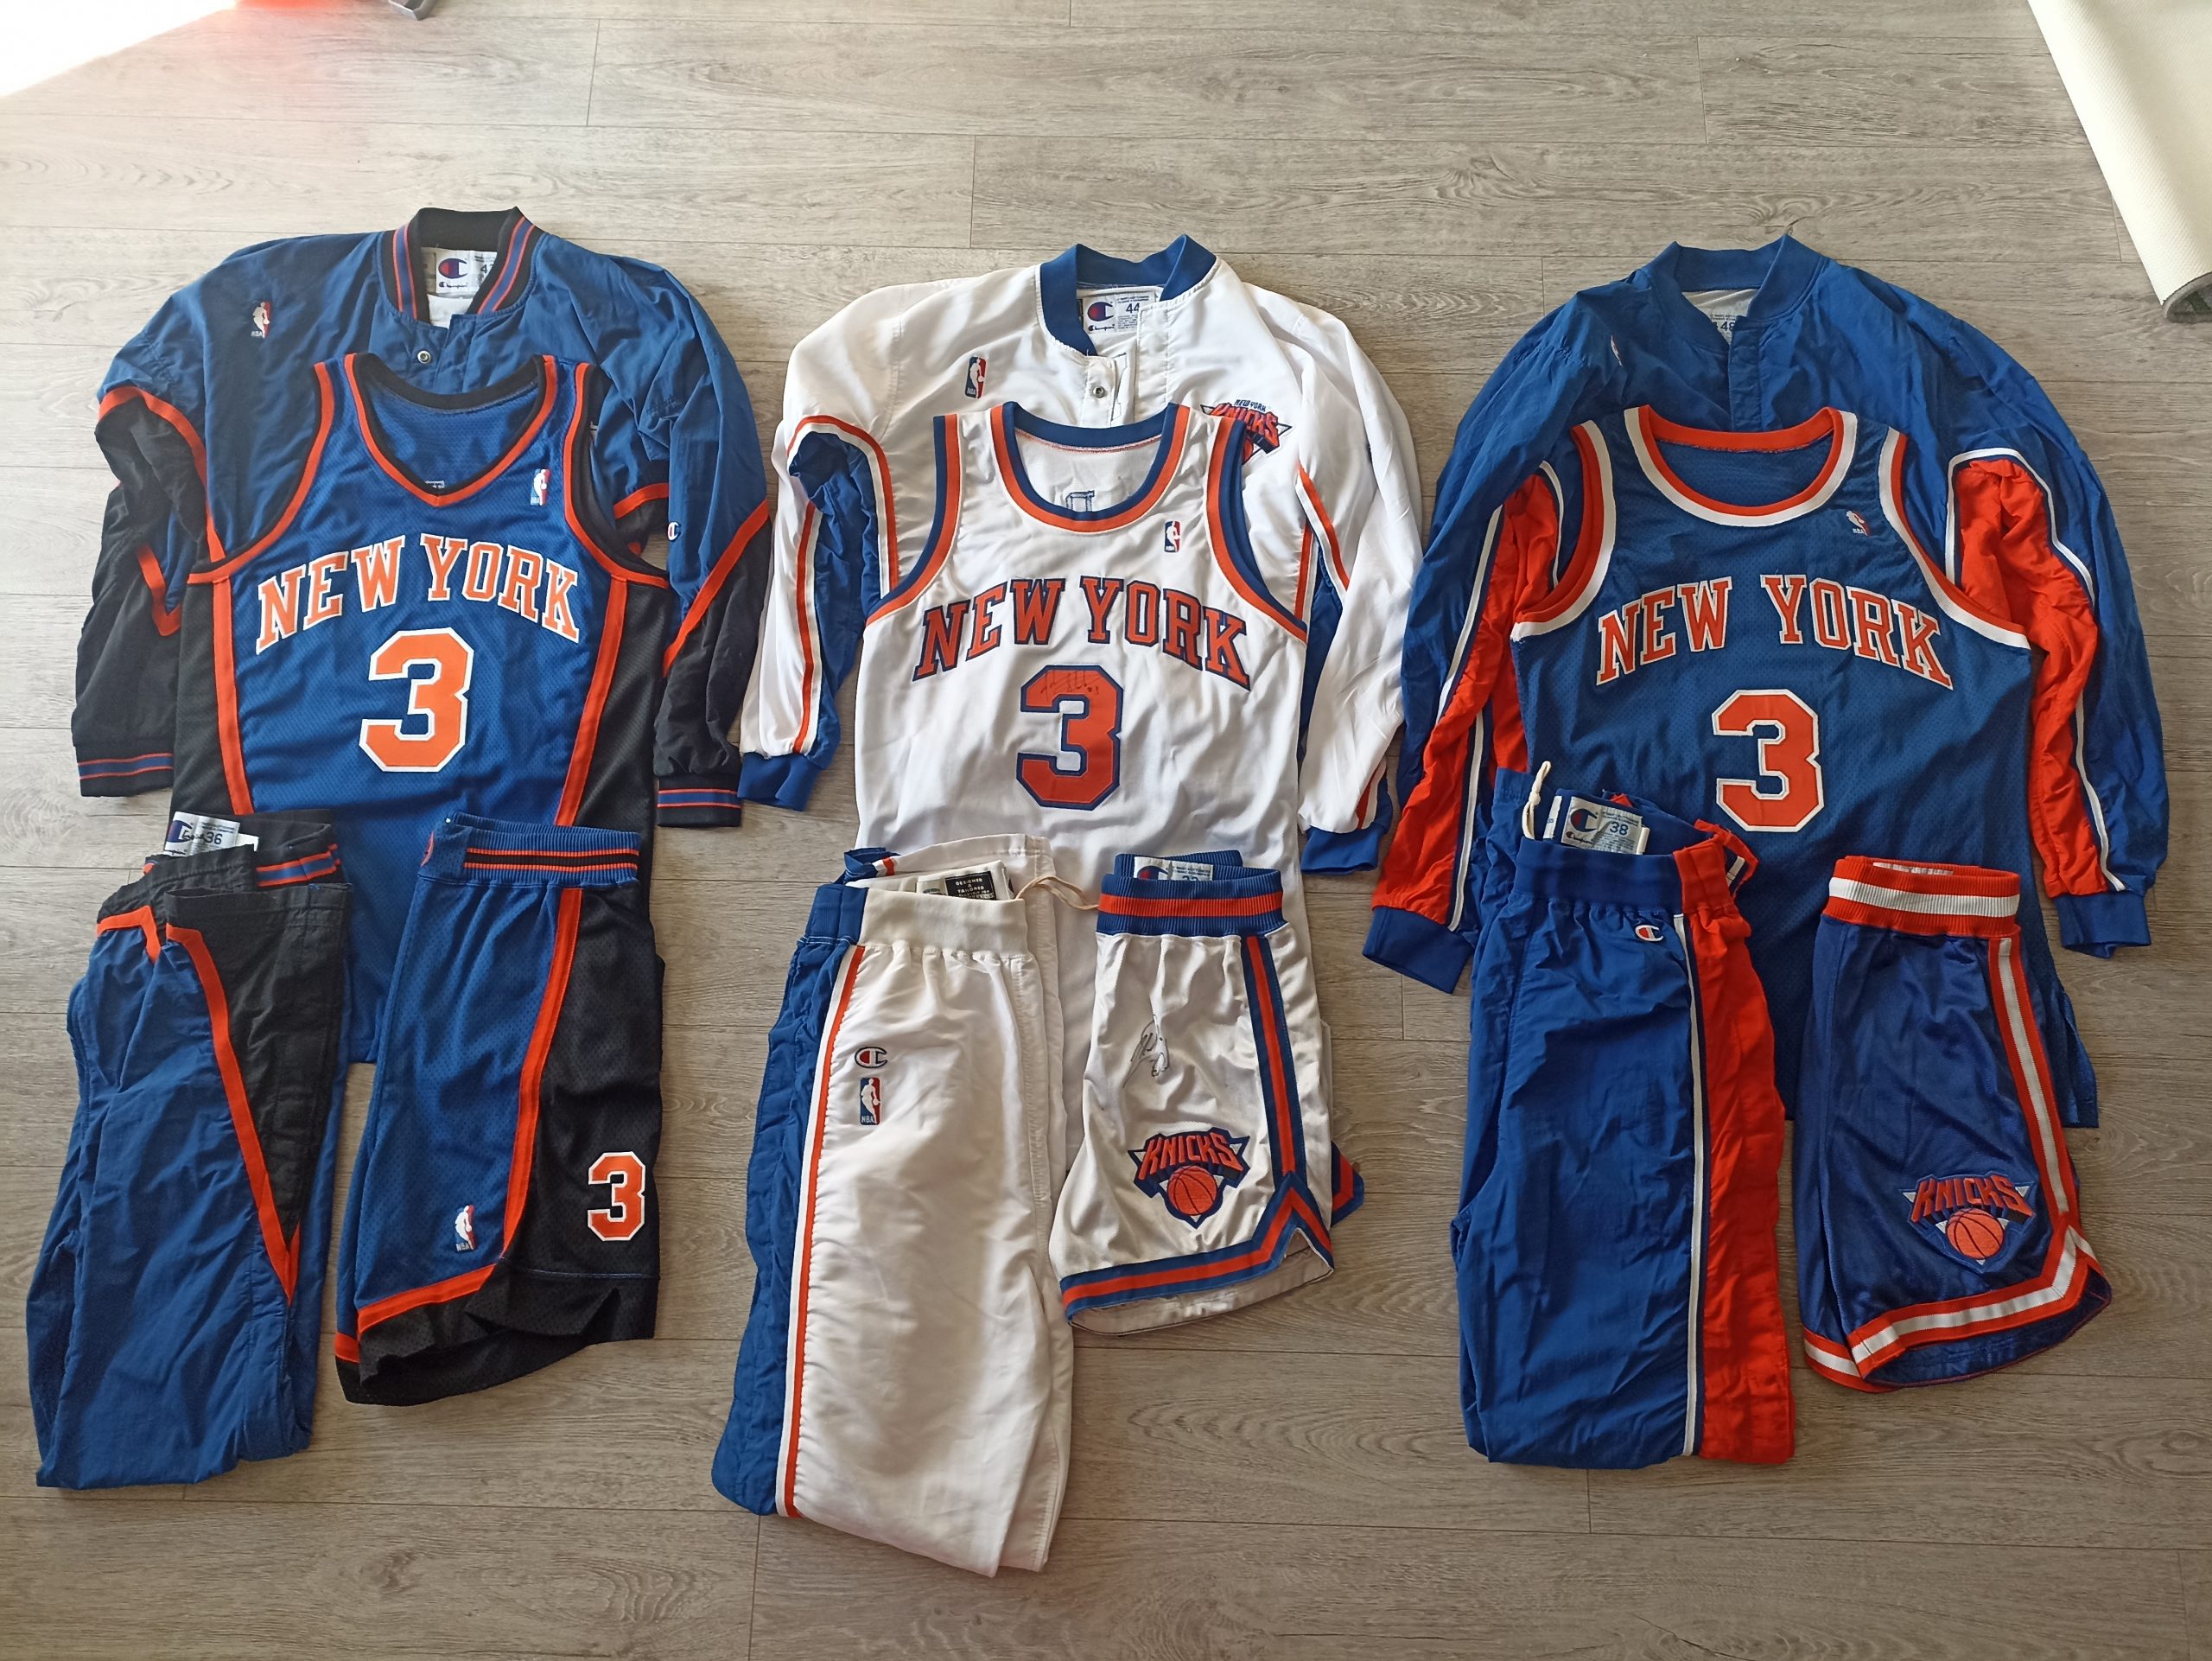 Three NBA Jersey Collectors Show Off Their Rarest Finds